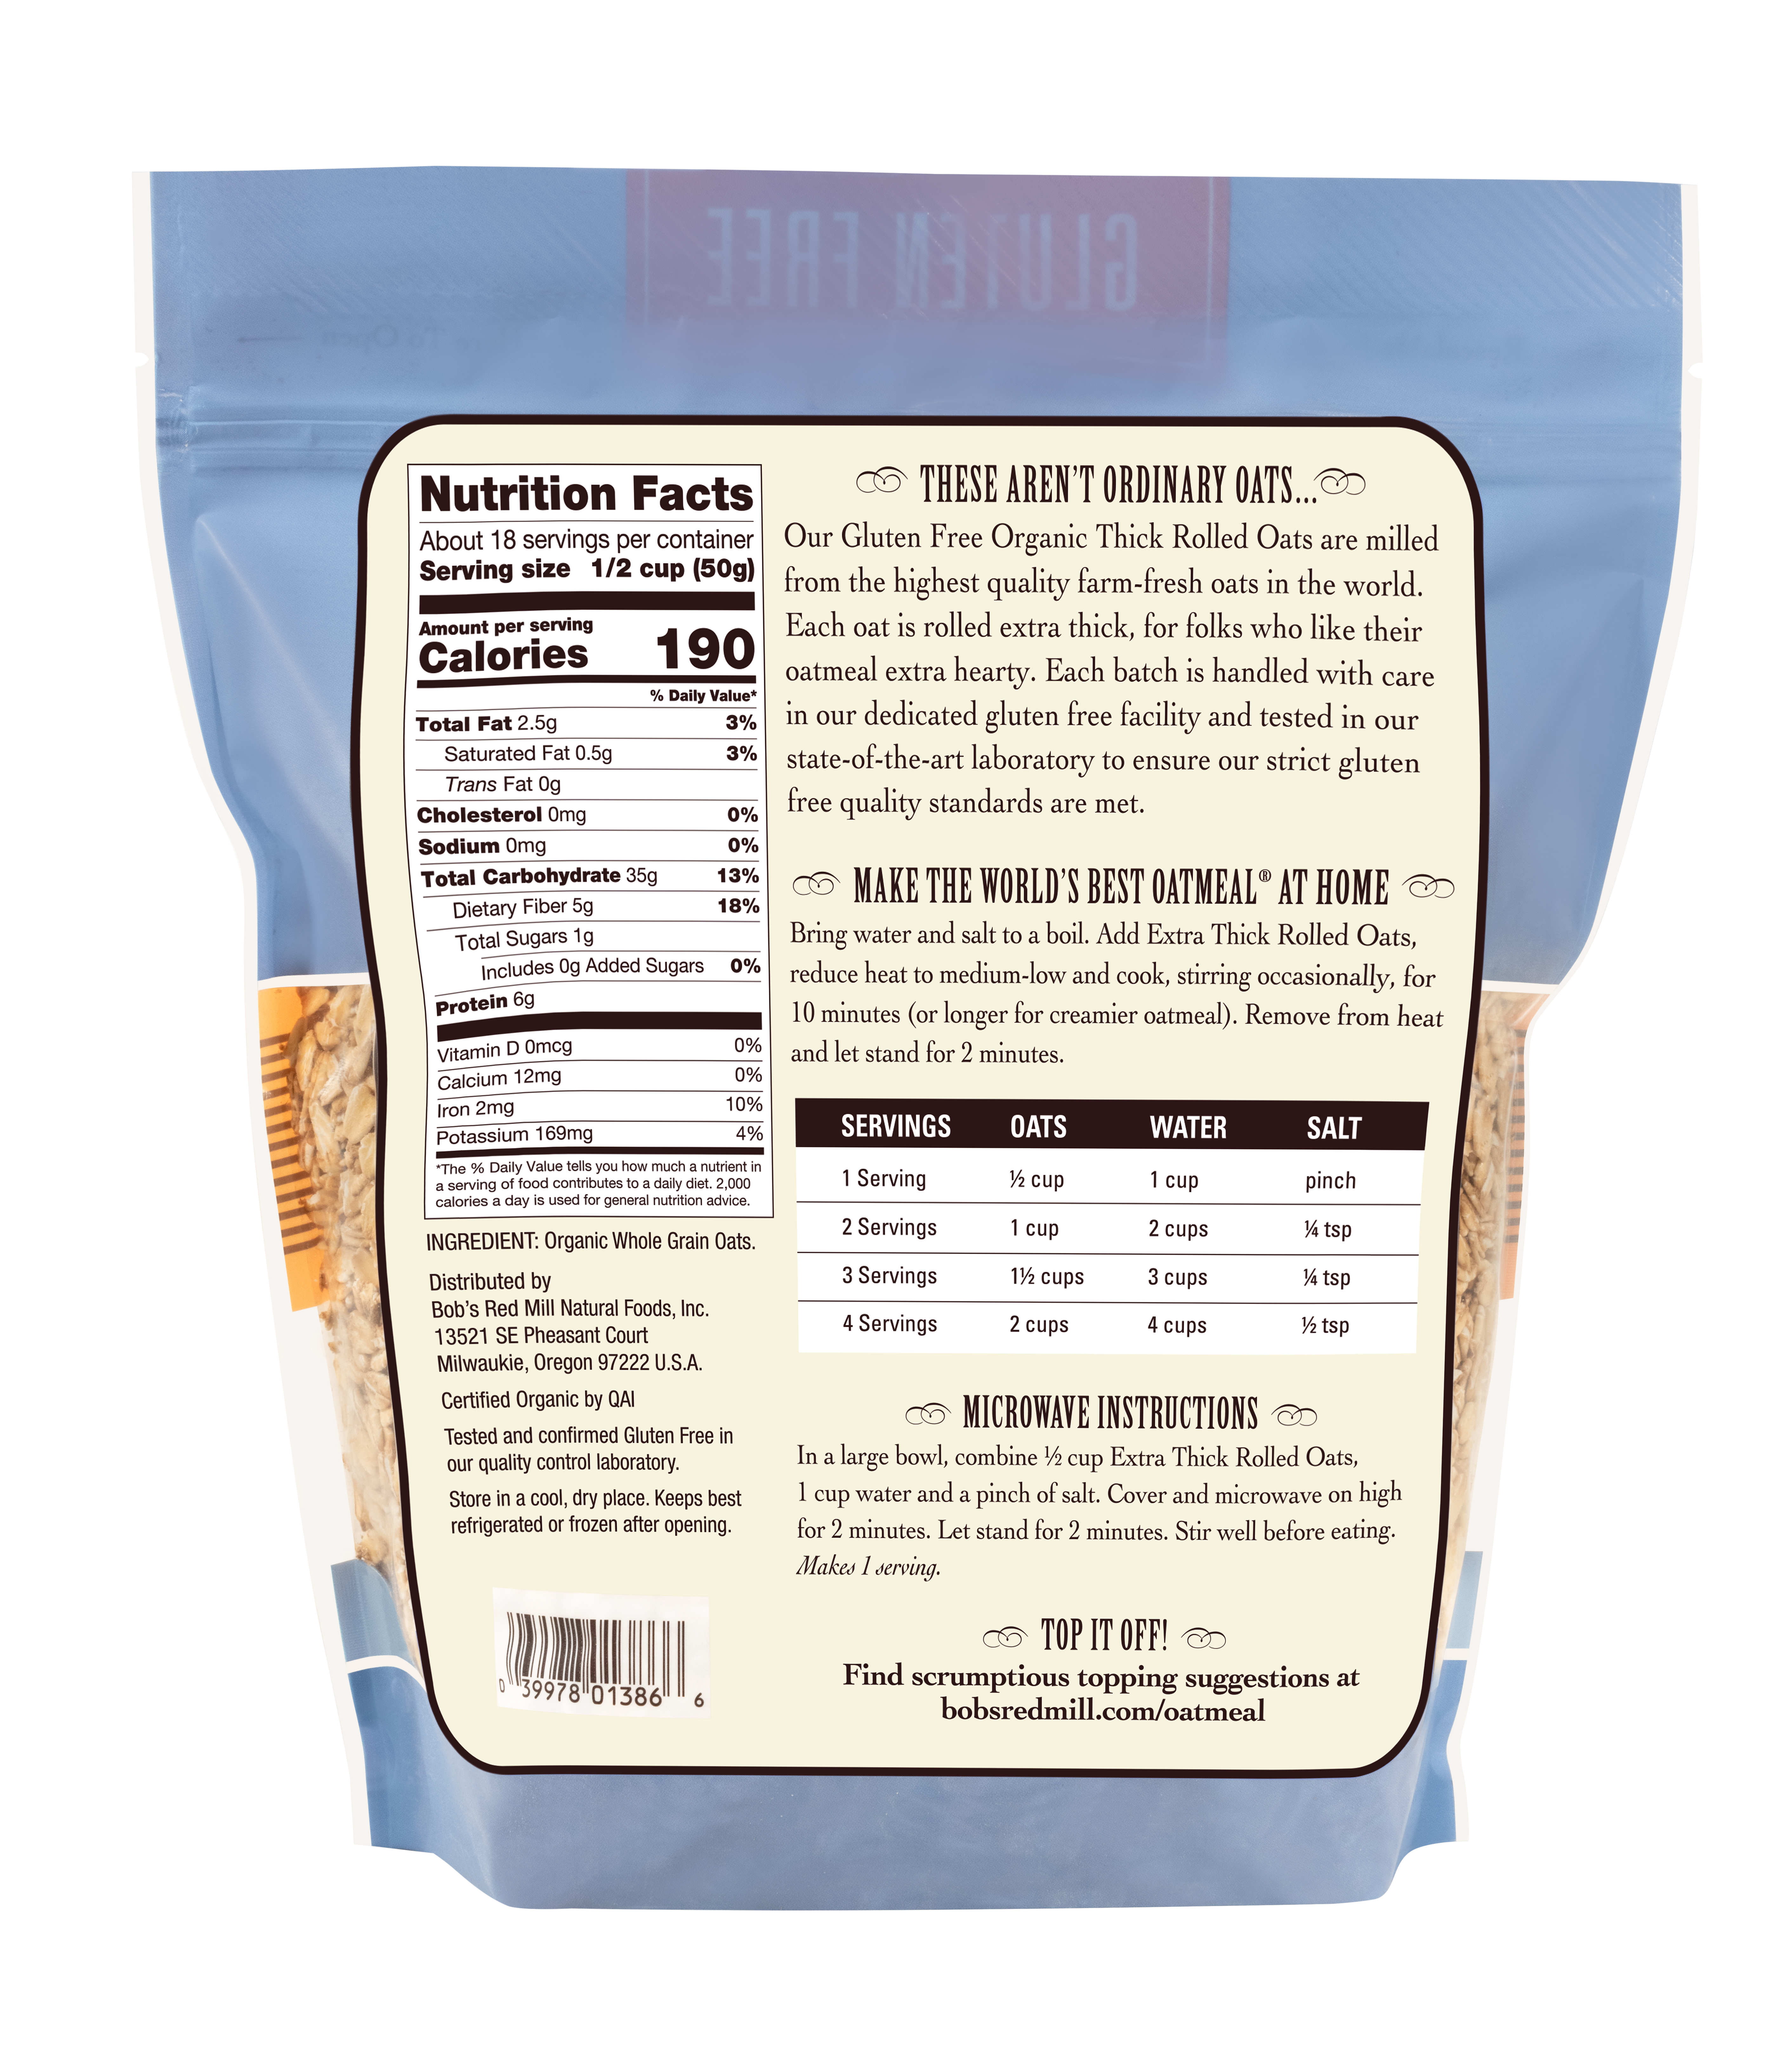 Gluten Free Organic Thick Rolled Oats- back